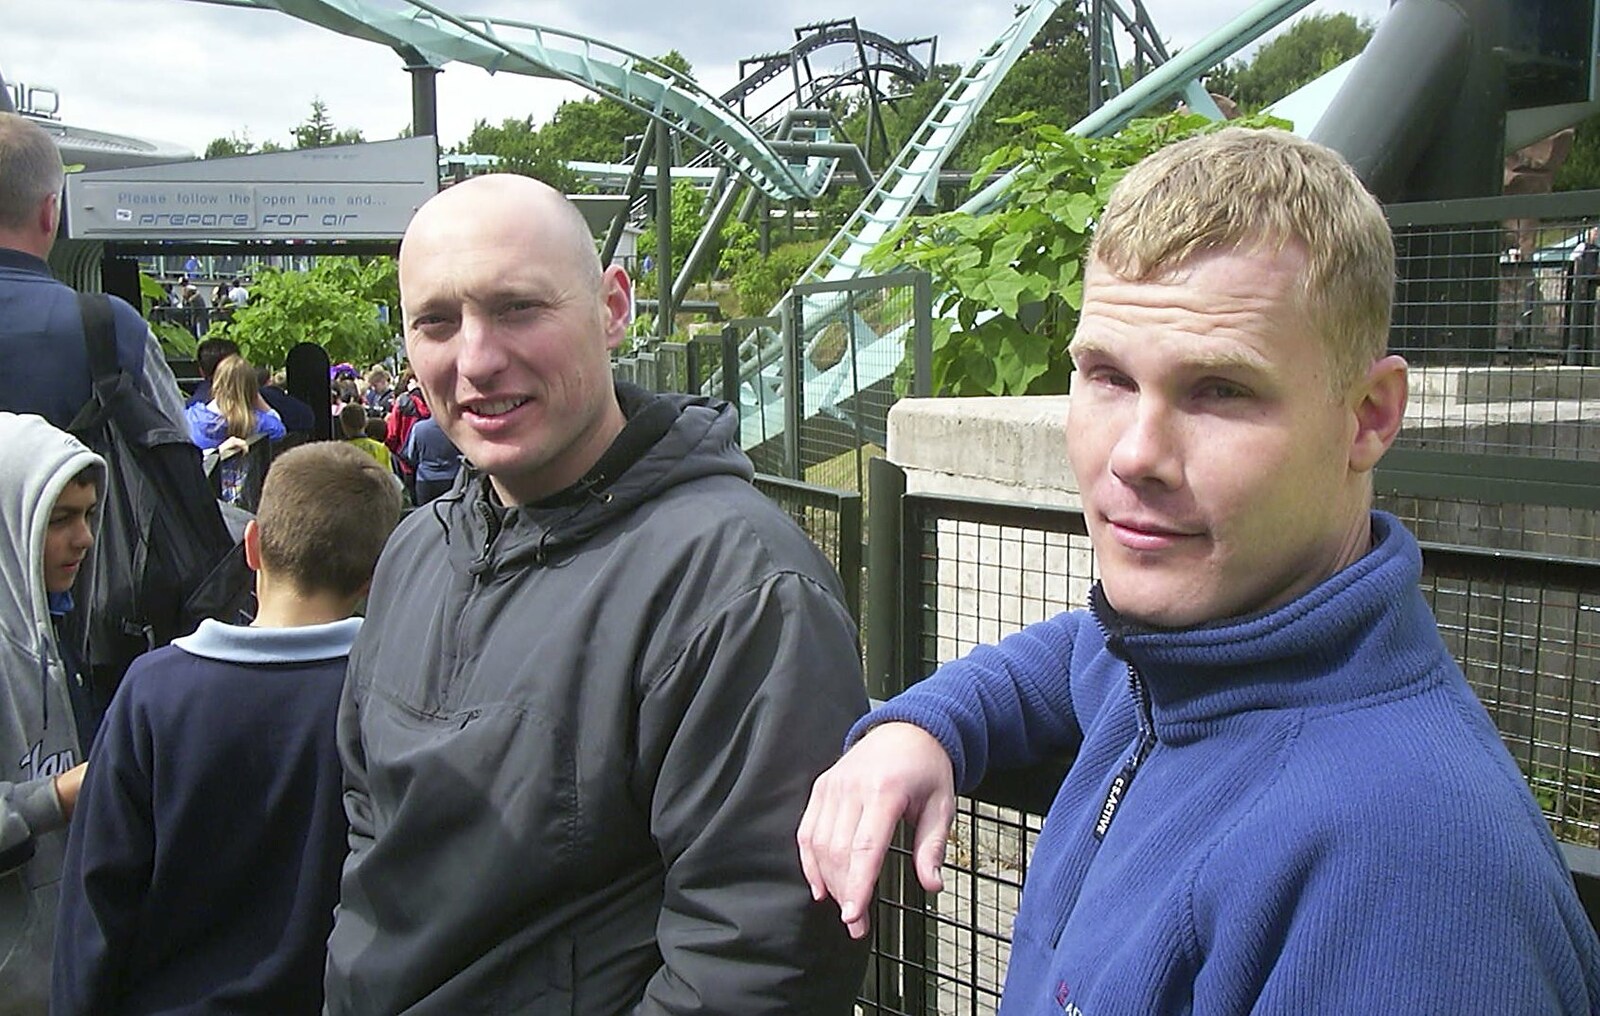 A Trip to Alton Towers, Staffordshire - 19th June 2004: Gov and Mikey-P near the queue for Air